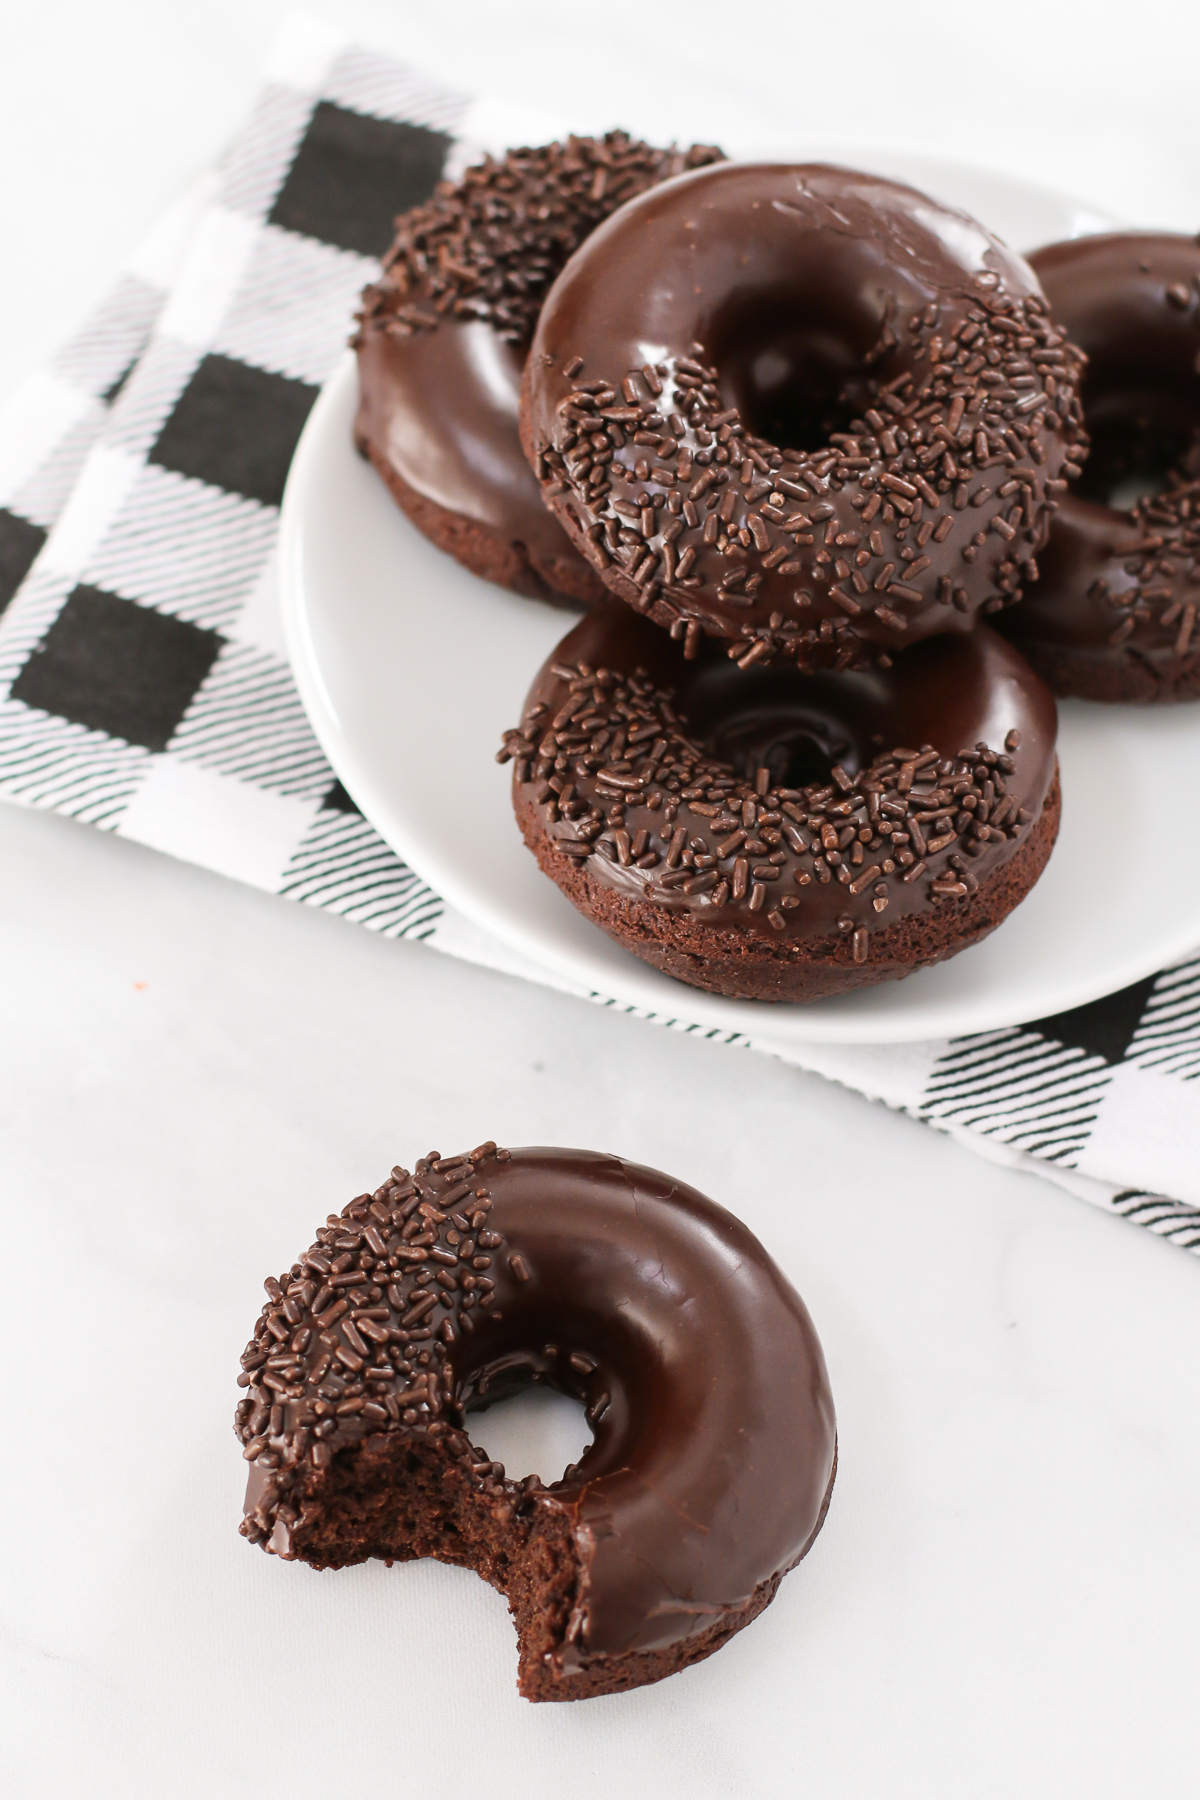 Gluten Free Vegan Baked Chocolate Donuts. Extra chocolatey cake donuts, dipped in a decadent chocolate glaze. Can’t forget the chocolate sprinkles!